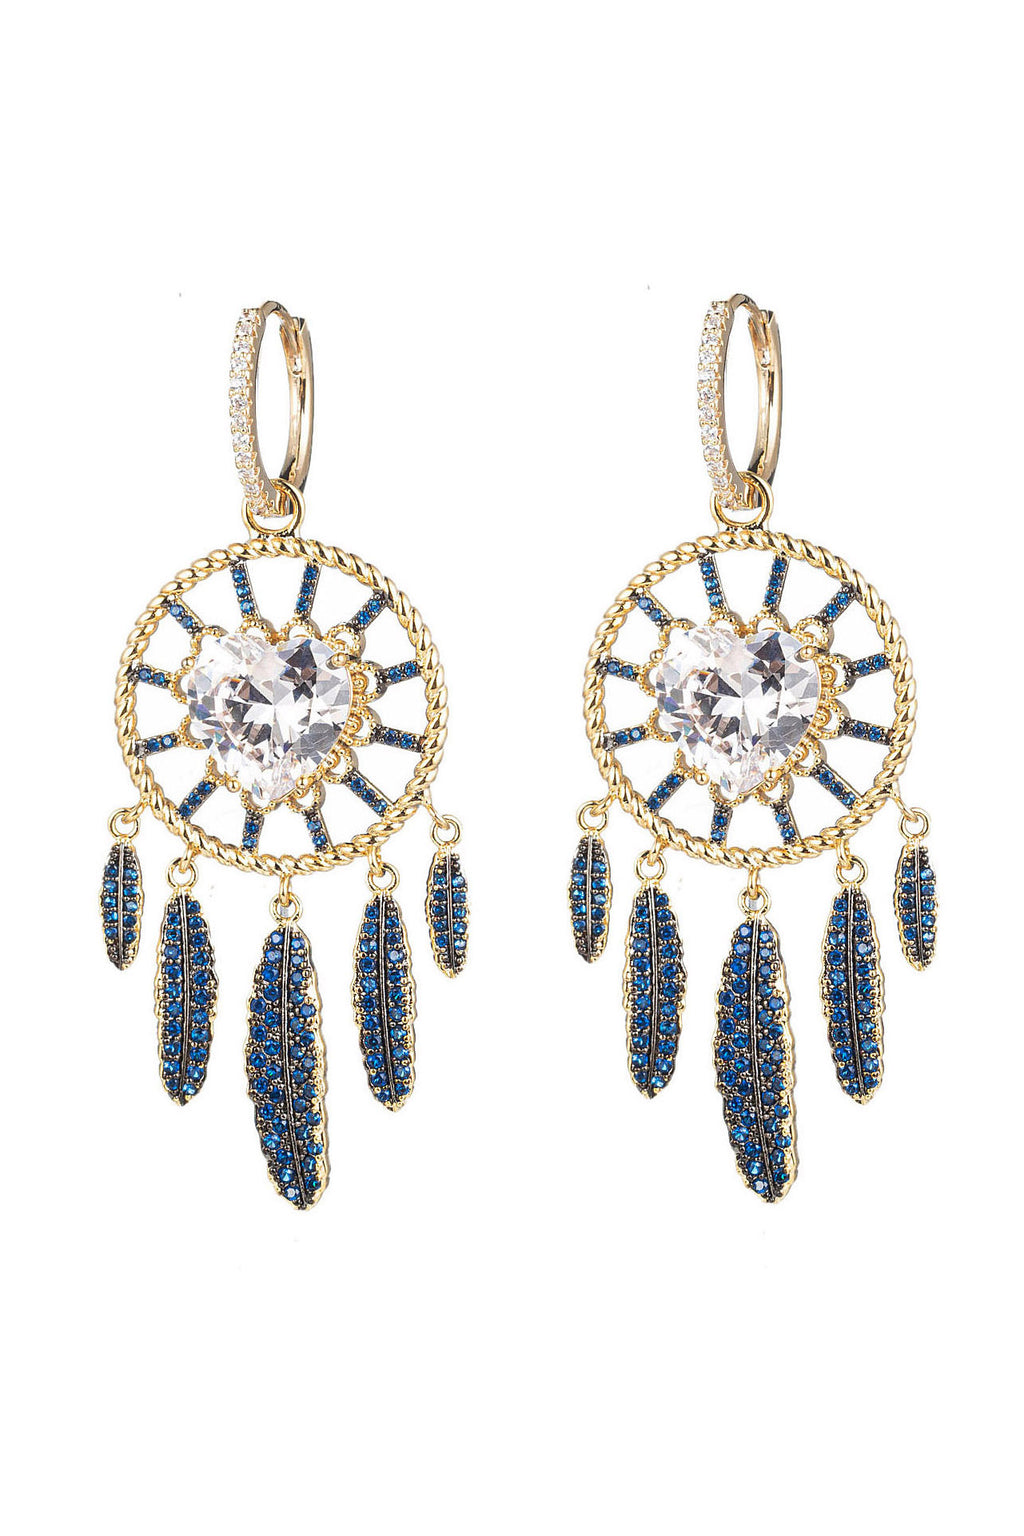 Gold brass dreamcatcher dangle earrings studded with CZ crystals.